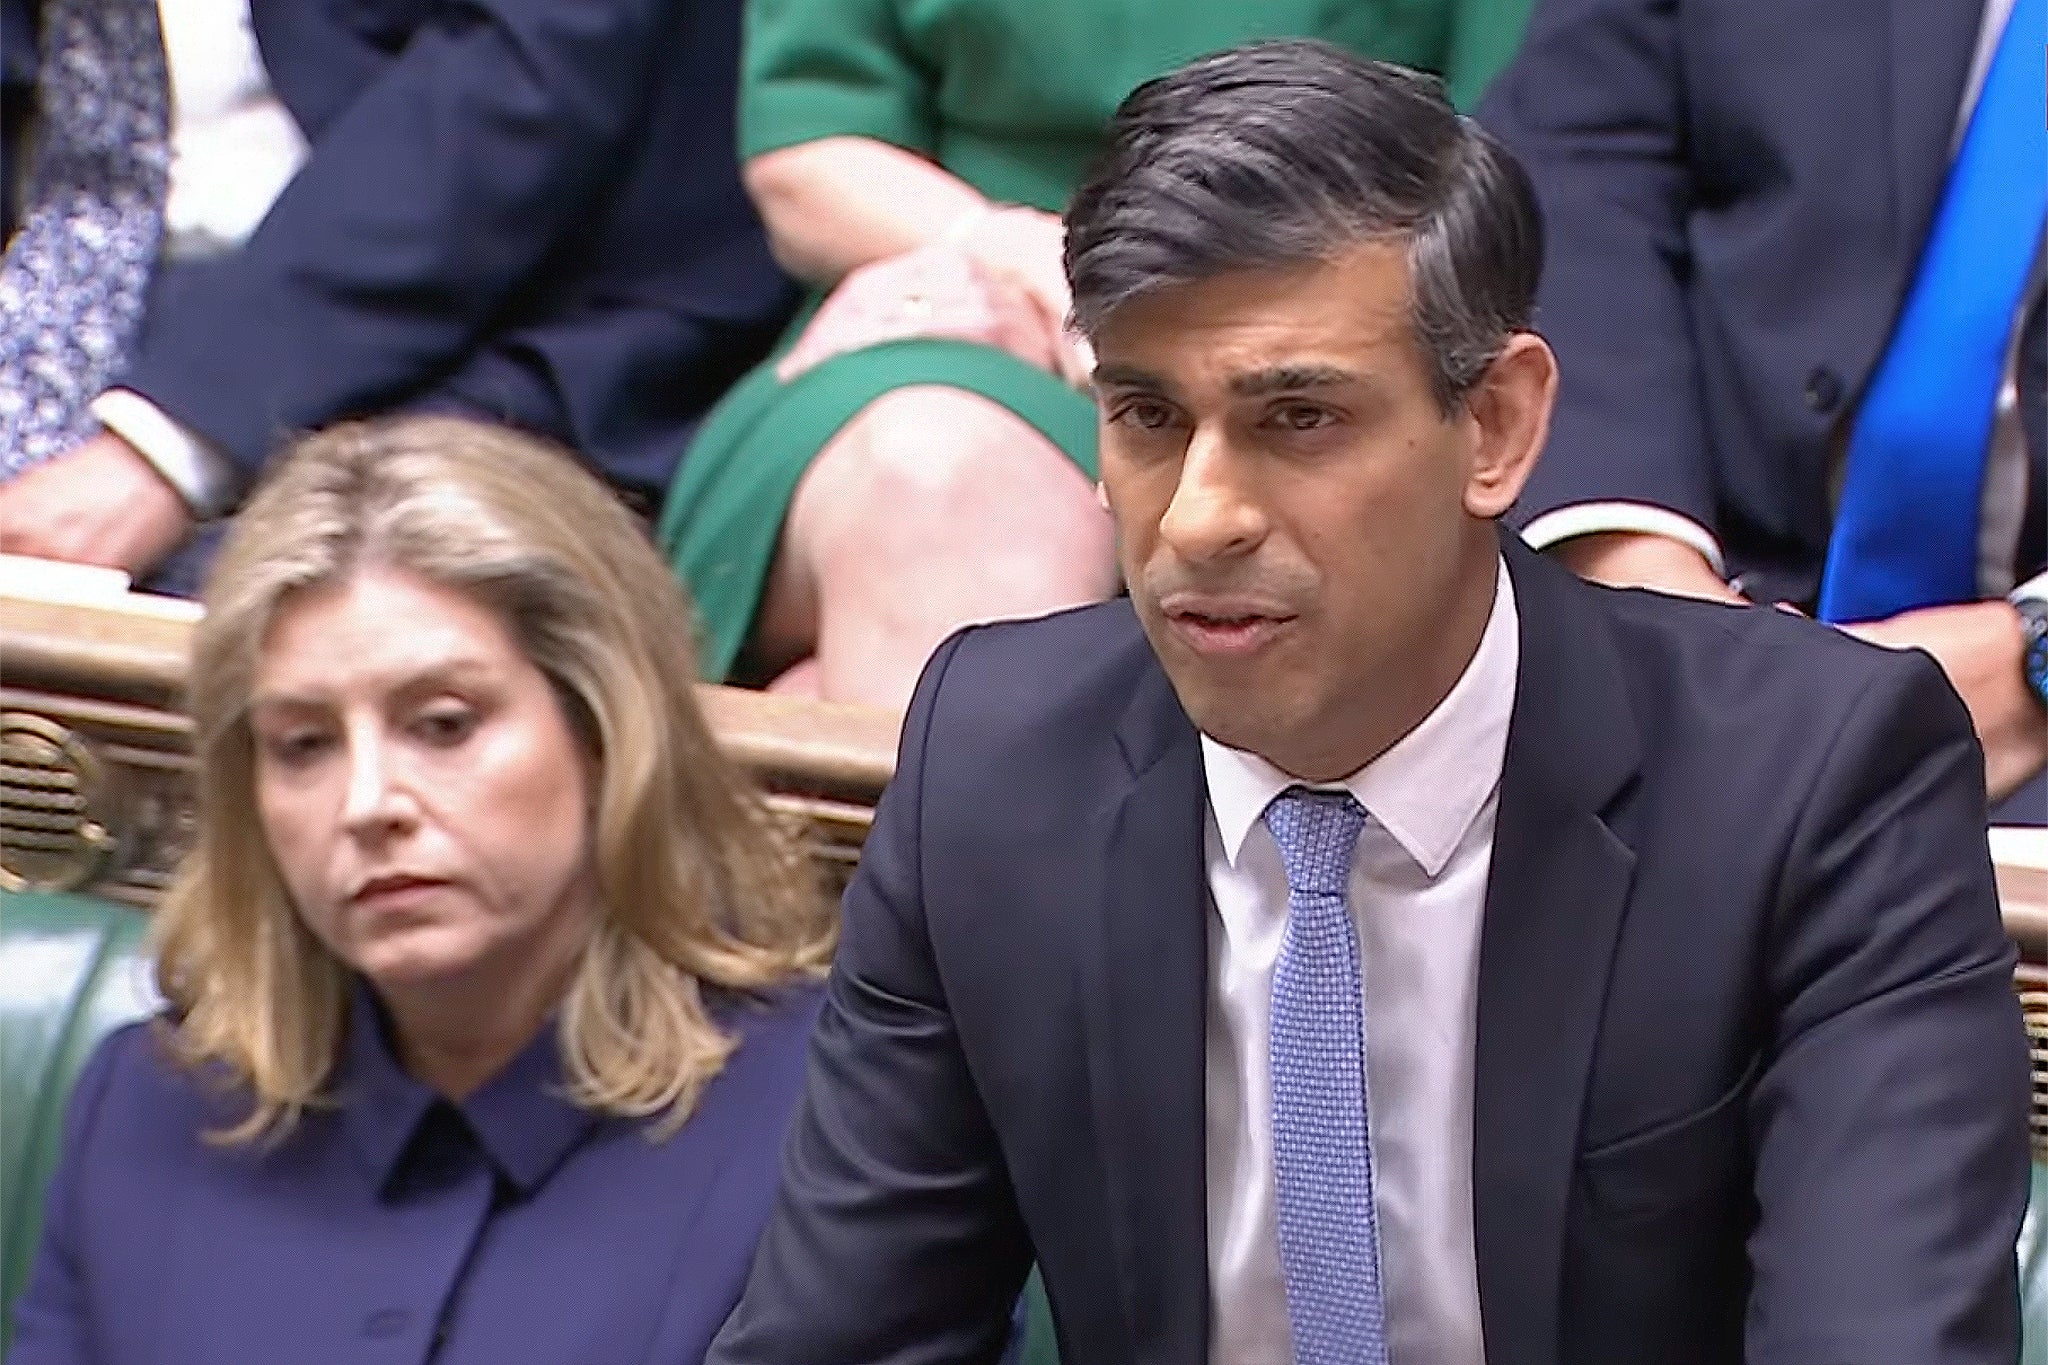 Ms Mordaunt says Rishi Sunak ‘rightly’ apologised for leaving the D-Day commemoration early